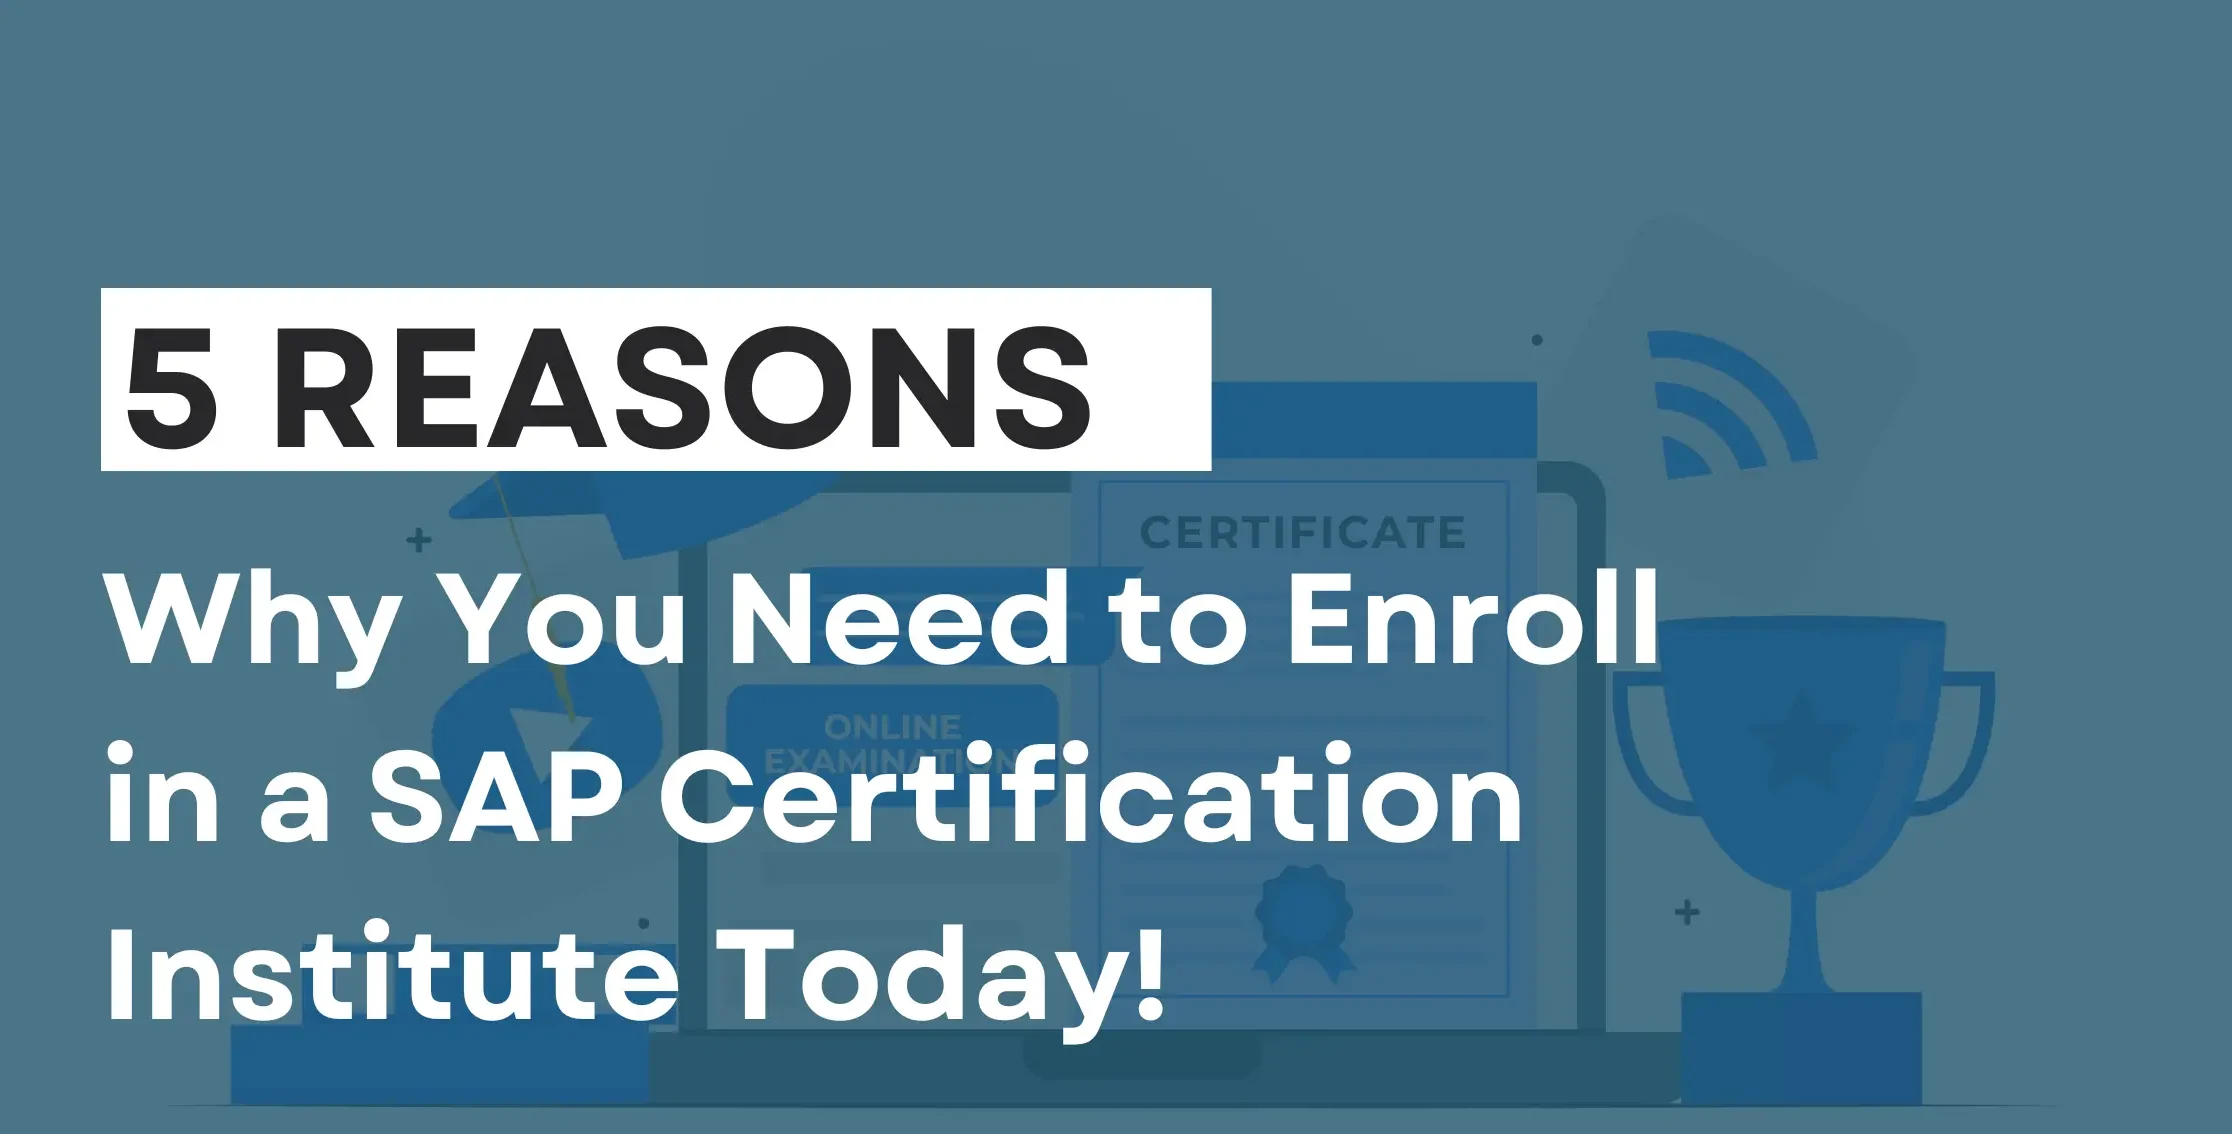 5 Reasons Why You Need to Enroll in a SAP Certification Institute Today!